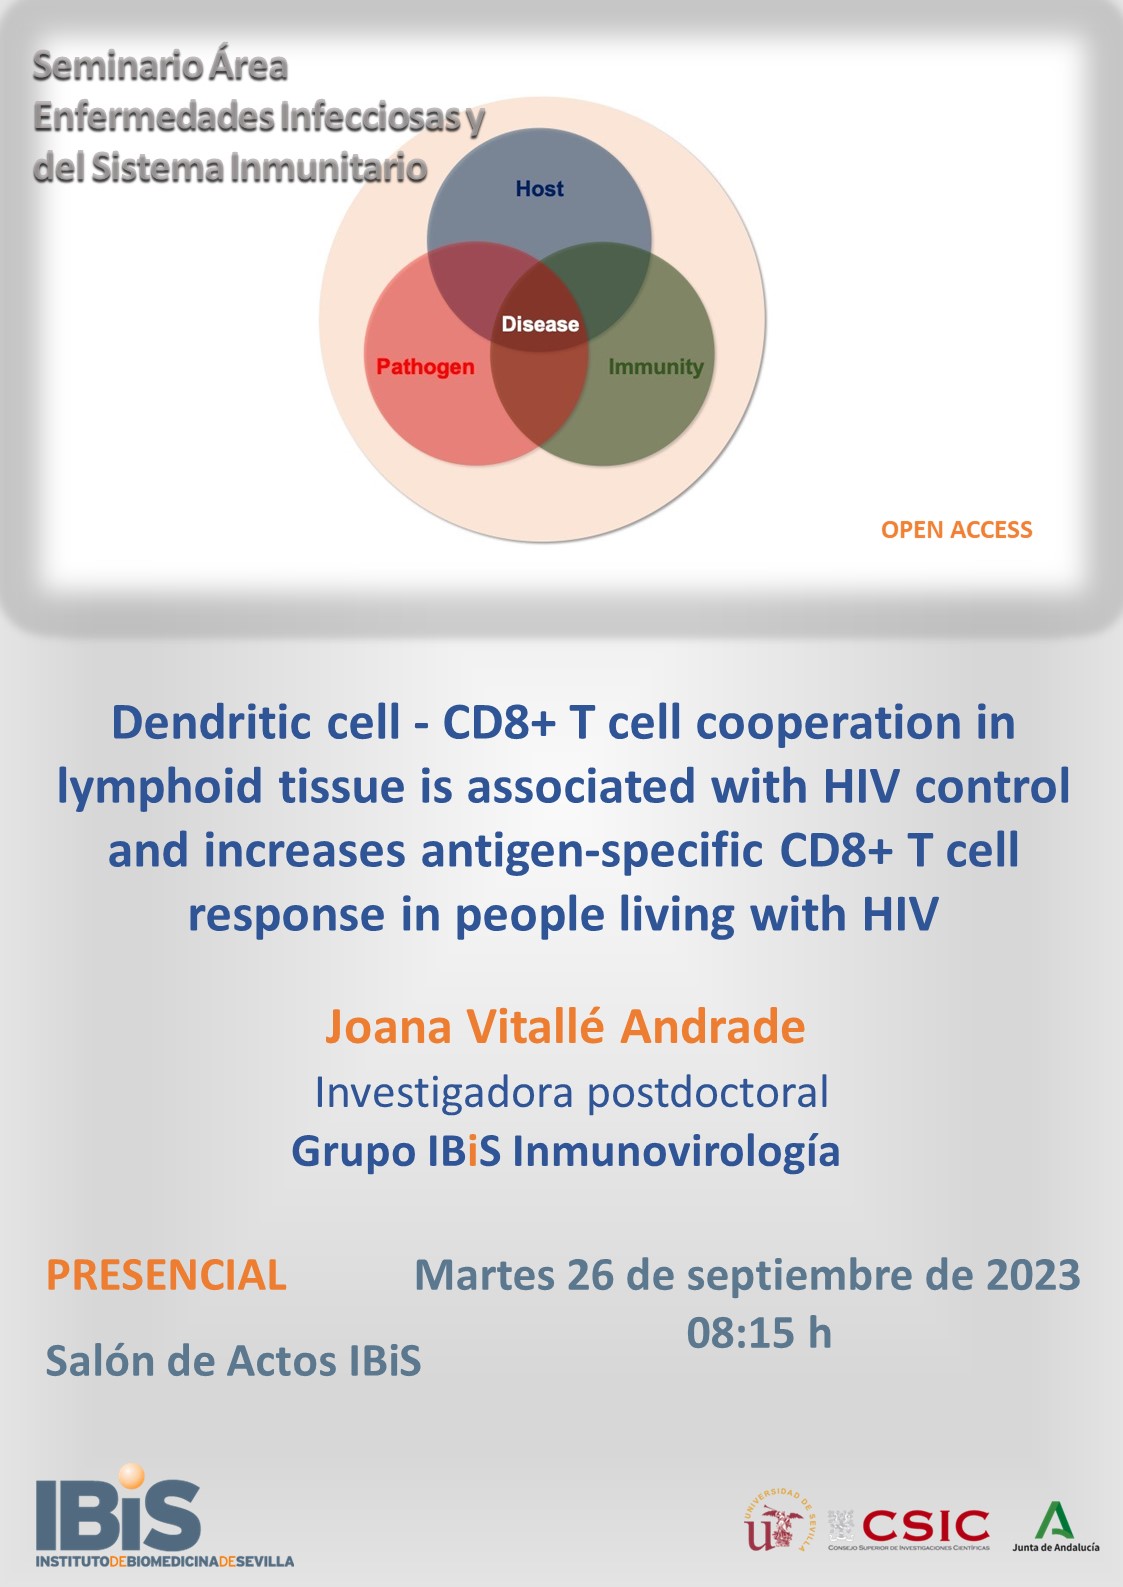 Poster: Dendritic cell - CD8+ T cell cooperation in lymphoid tissue is associated with HIV control and increases antigen-specific CD8+ T cell response in people living with HIV